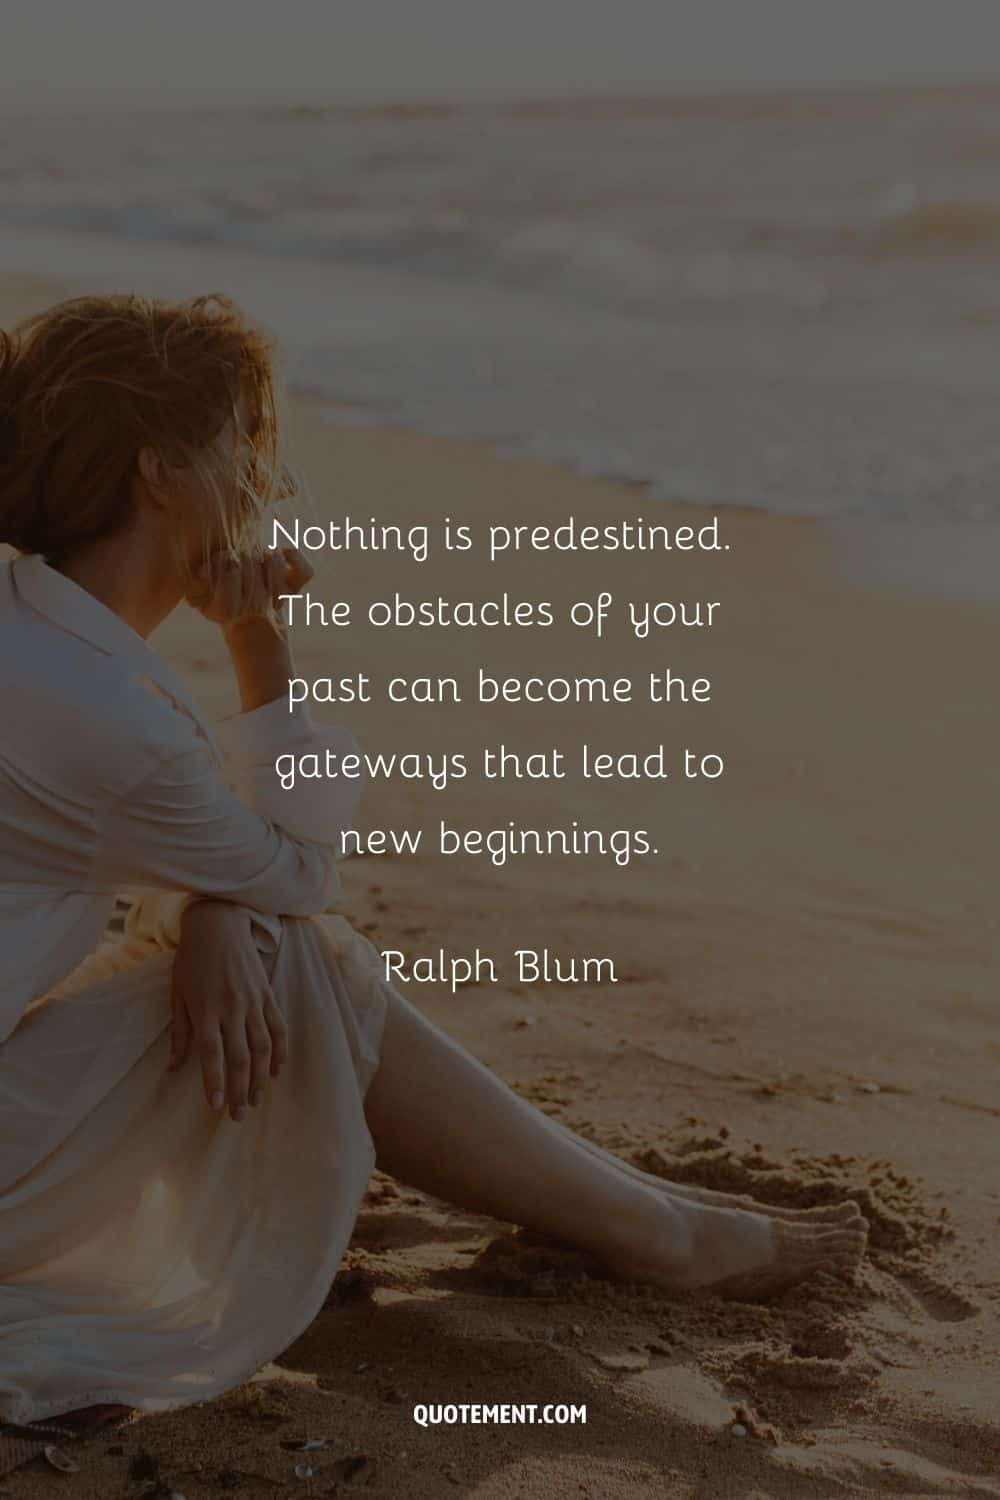 “Nothing is predestined. The obstacles of your past can become the gateways that lead to new beginnings.” — Ralph Blum 